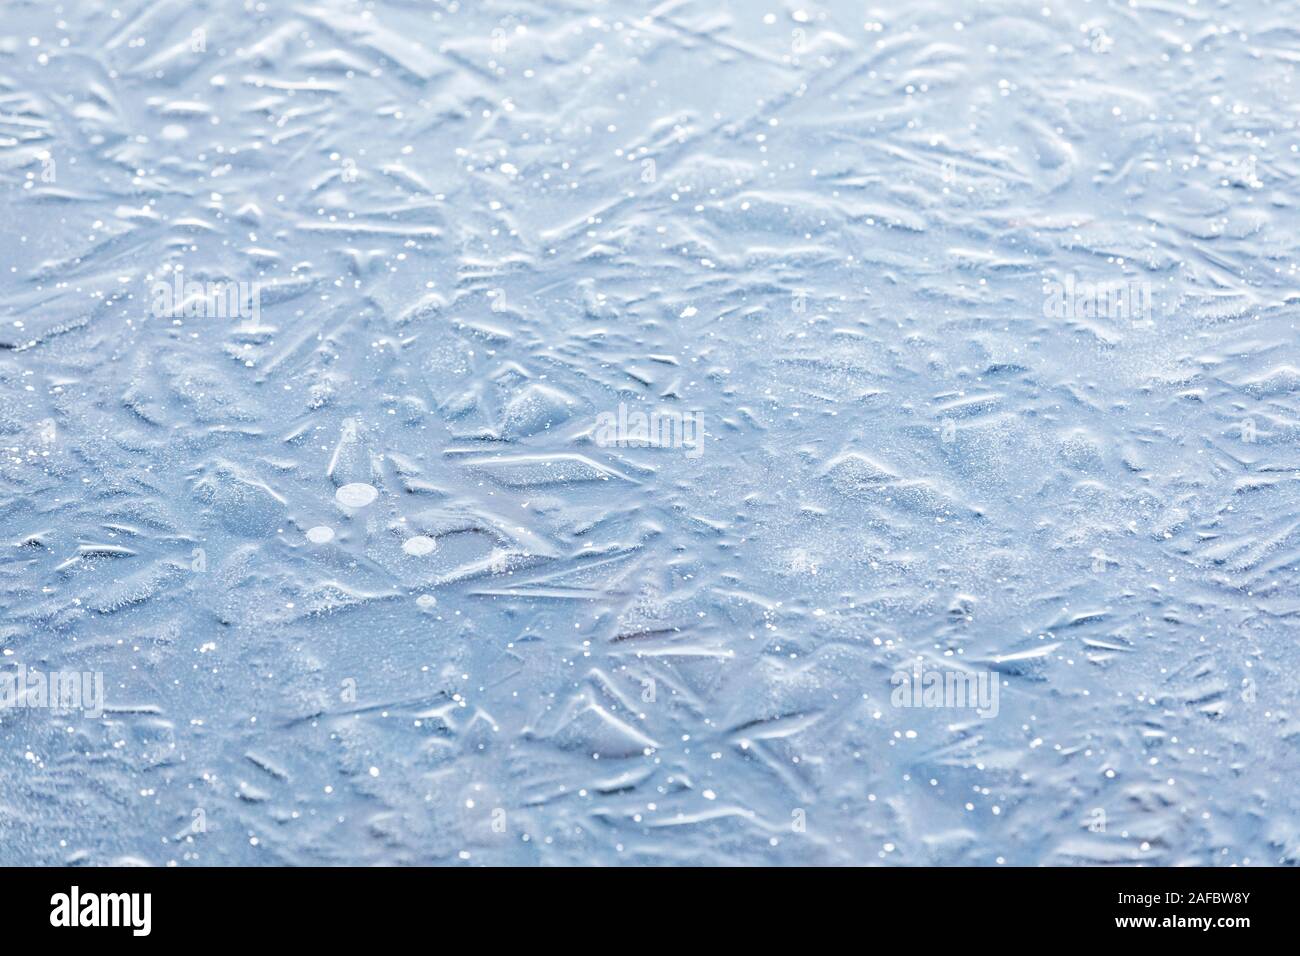 Abstract background of naturally textured frozen water surface Stock Photo